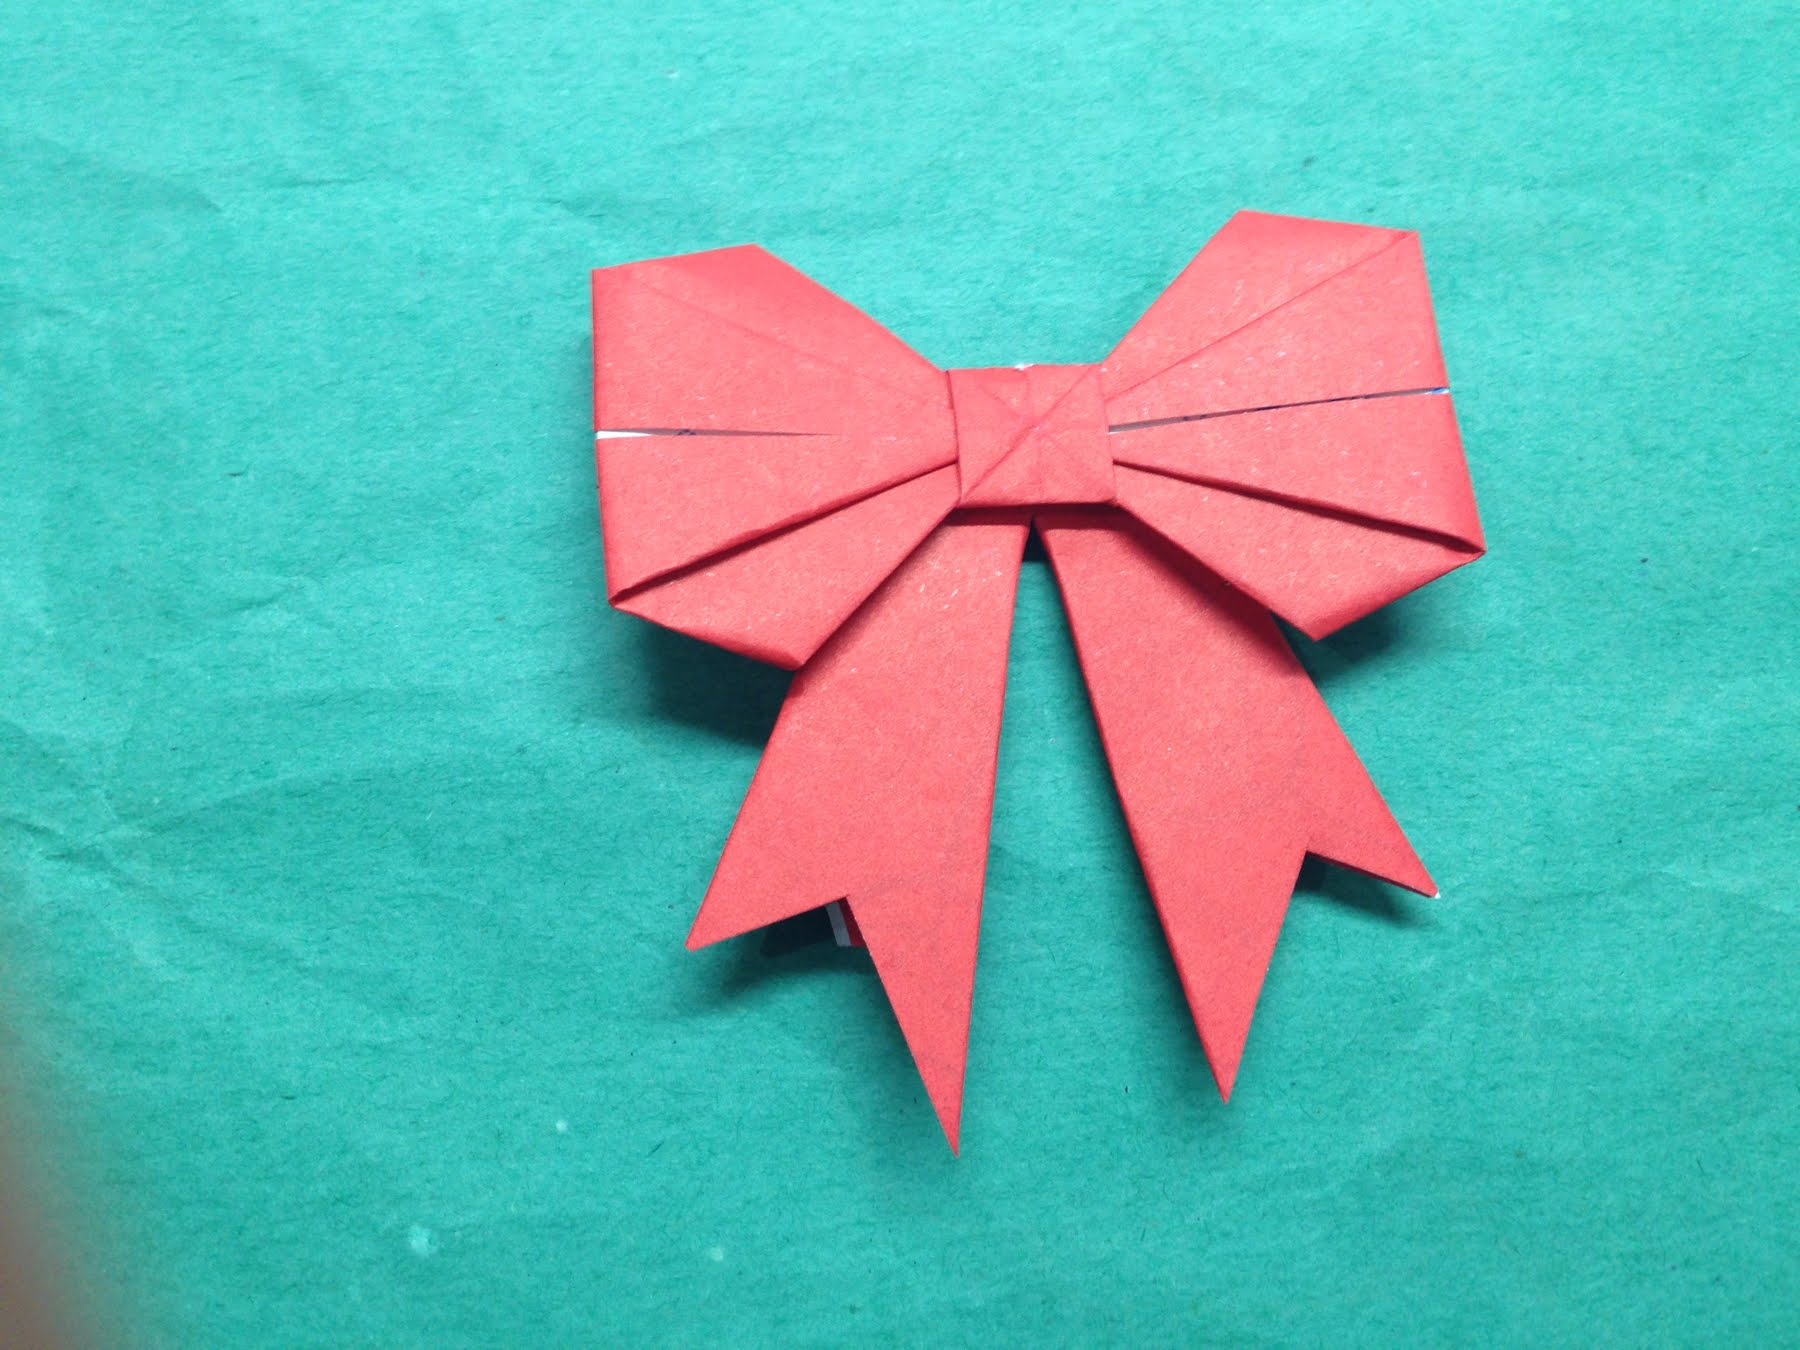 How to fold a paper Bow/Ribbon - The Art of Paper Folding - YouTube